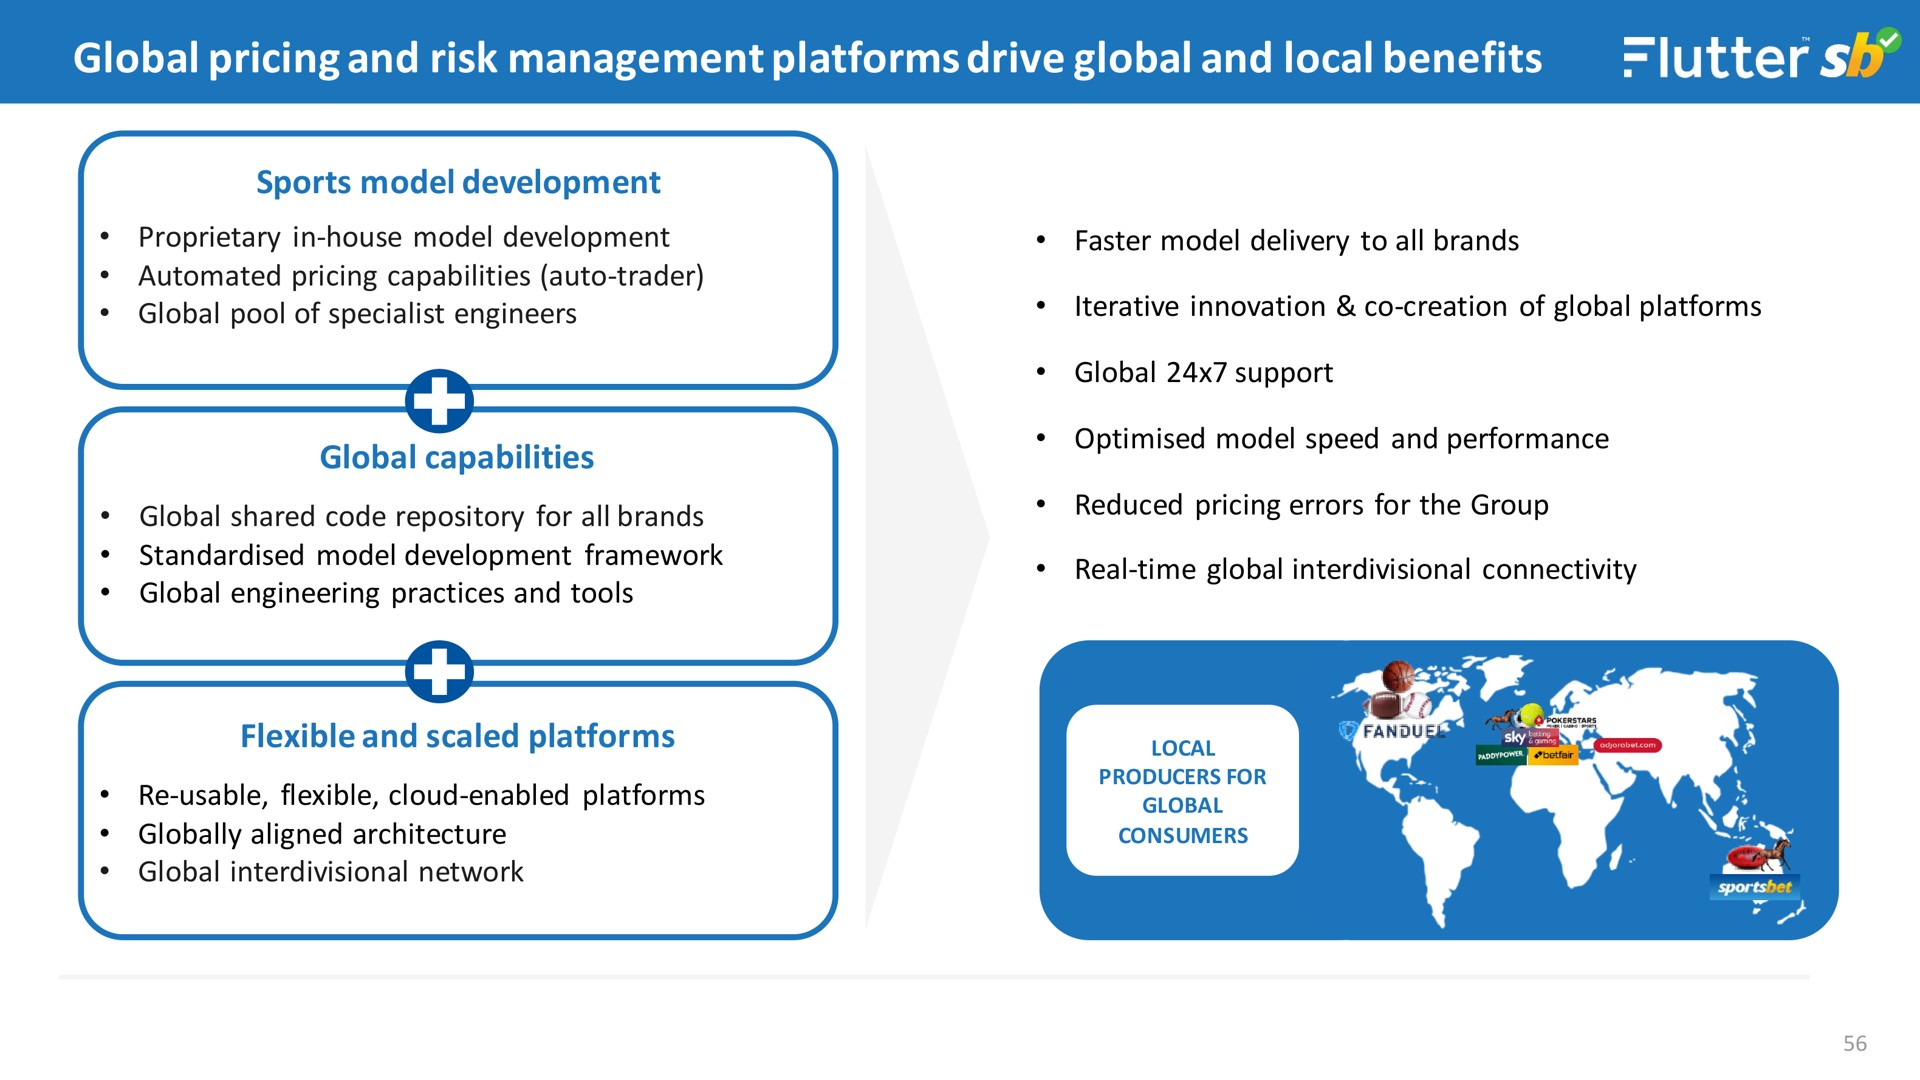 global pricing and risk management platforms drive global and local benefits | Flutter